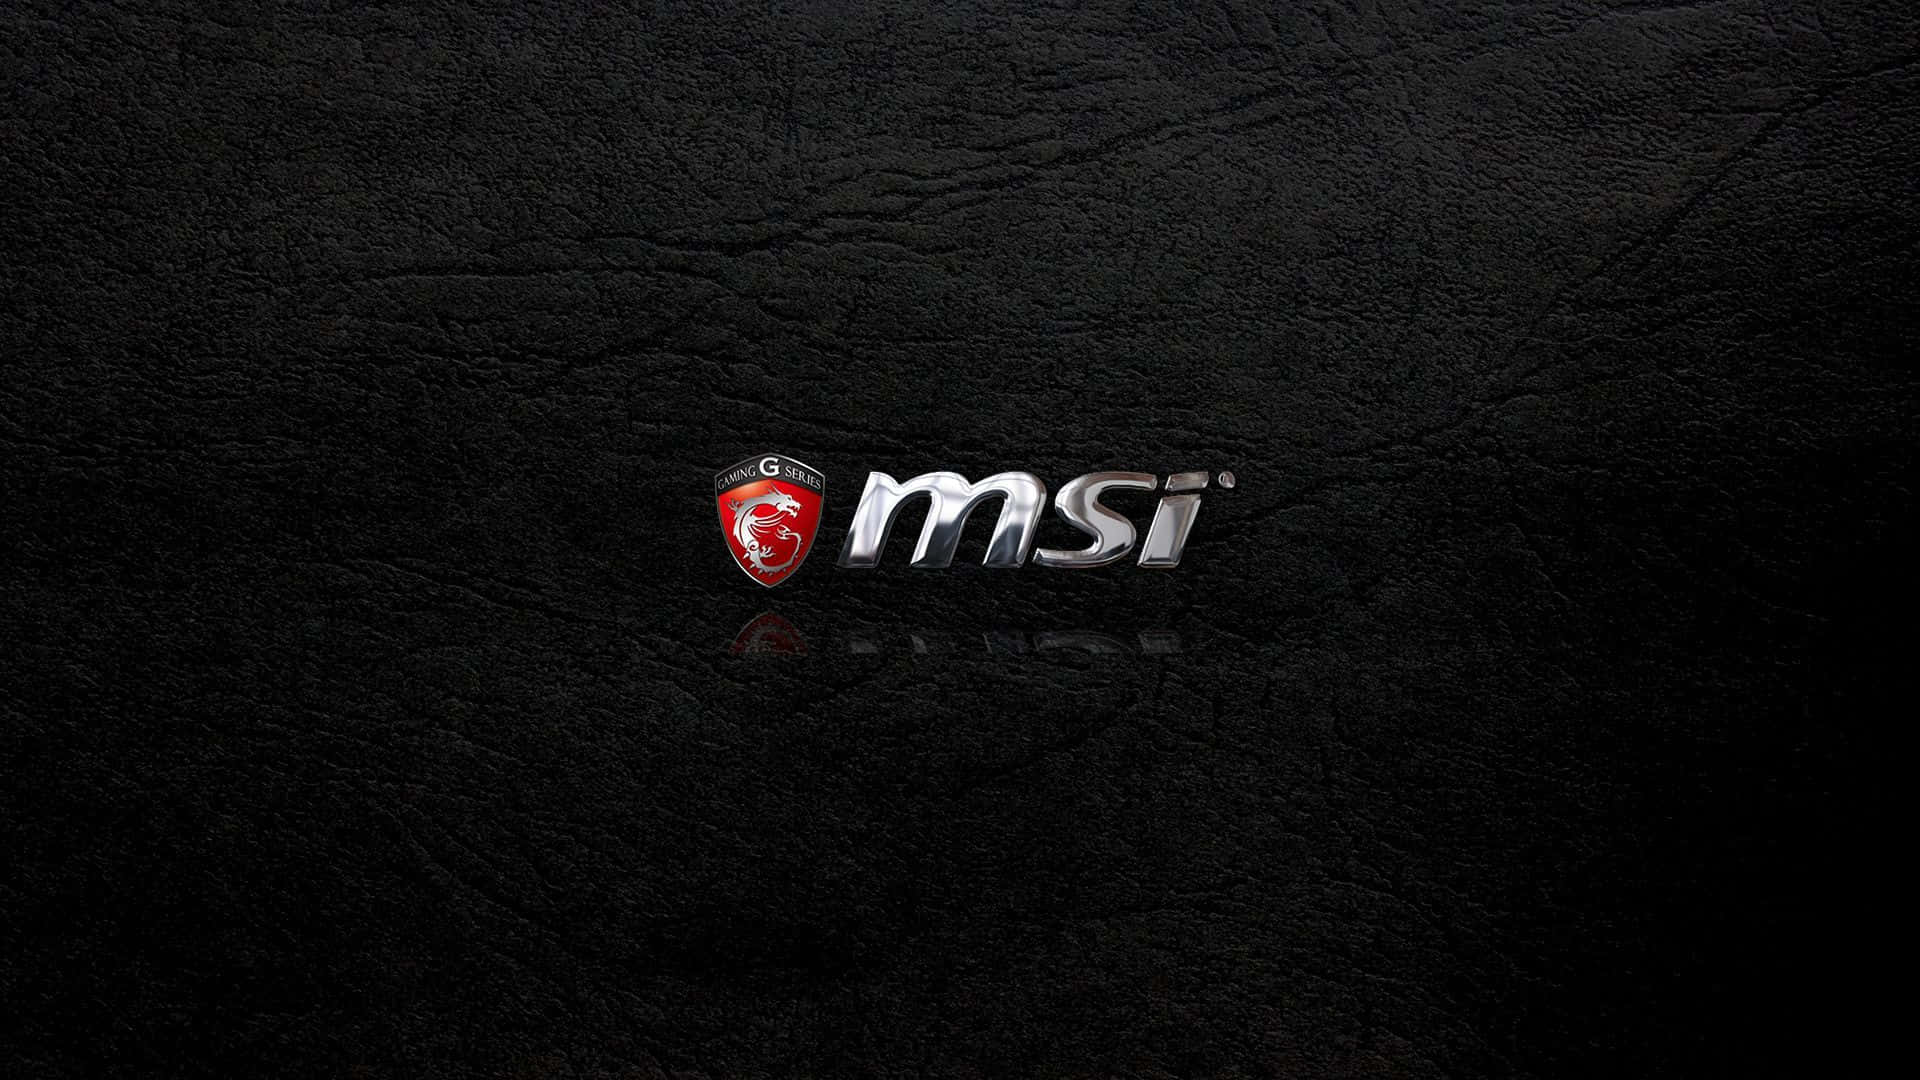 "Take your gaming experience to the next level with MSI"